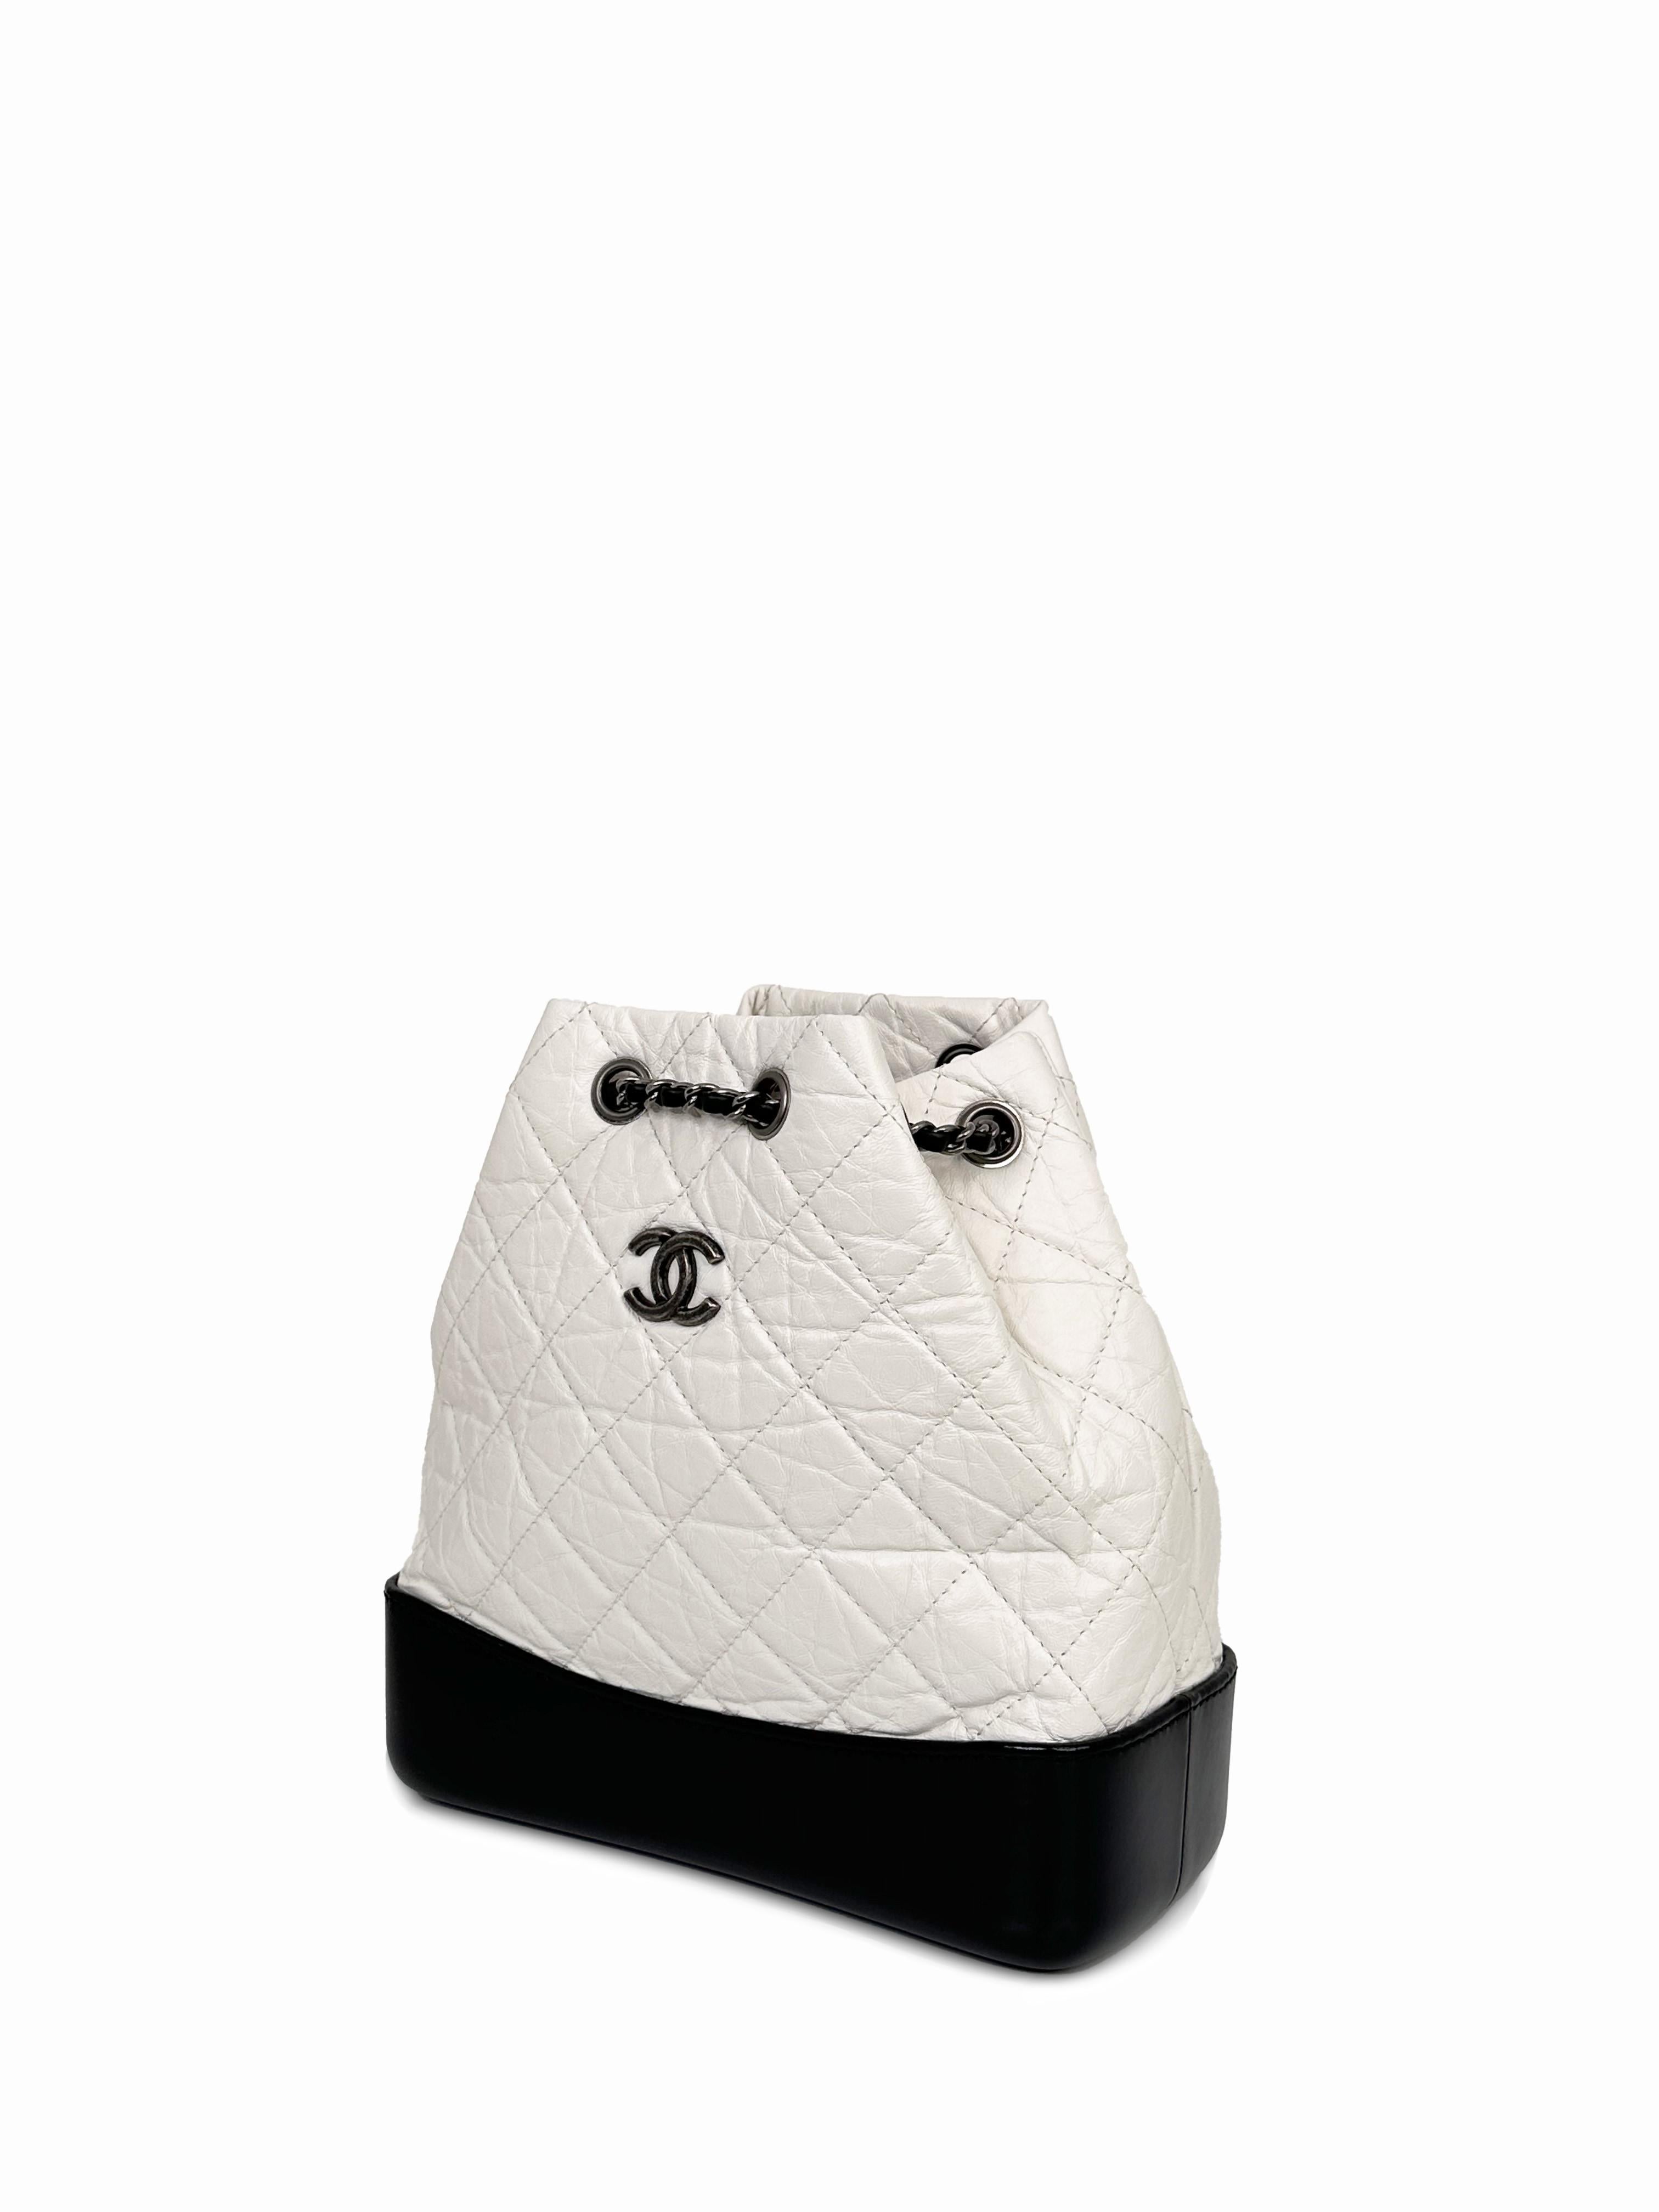 The Chanel Gabrielle Backpack is from a line designed by Karl Lagerfeld for the Spring/Summer 2017 Ready-to-wear show. It features aged white quilted leather, a sturdy base of smooth black leather, the iconic CC logo, and woven chain leather straps.